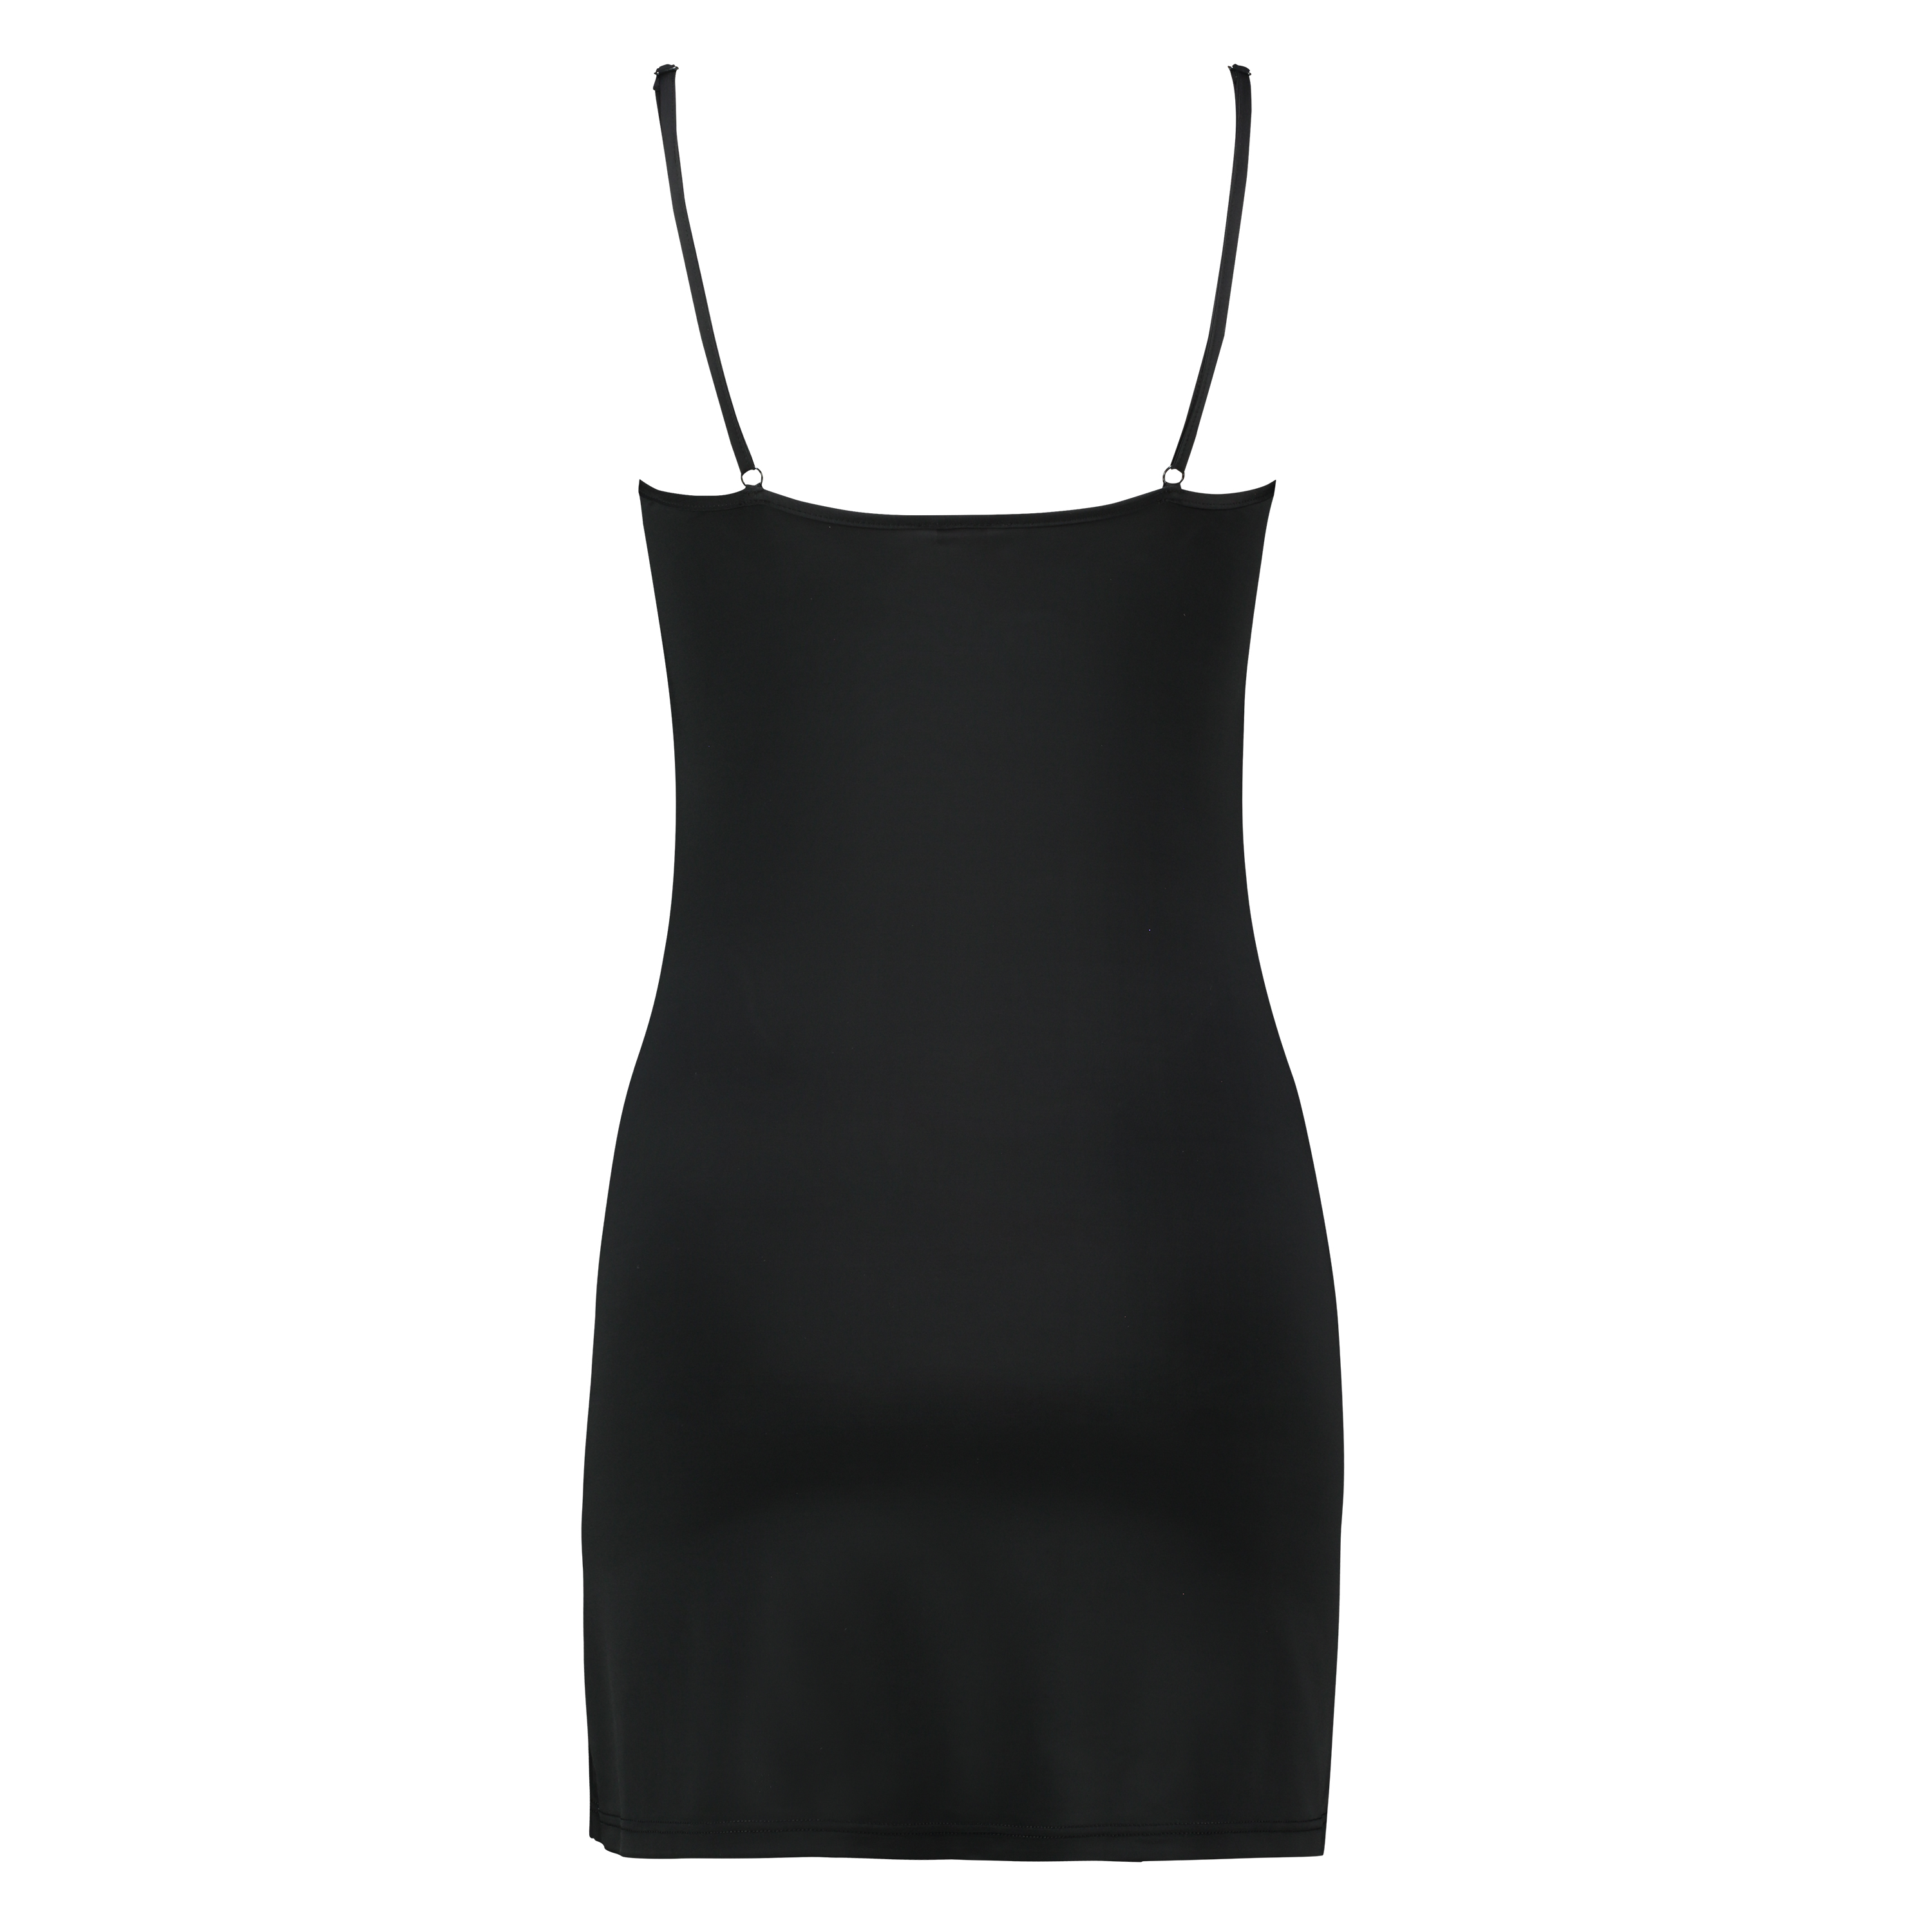 Smoothing underdress for €22.99 - All Panties - Hunkemöller